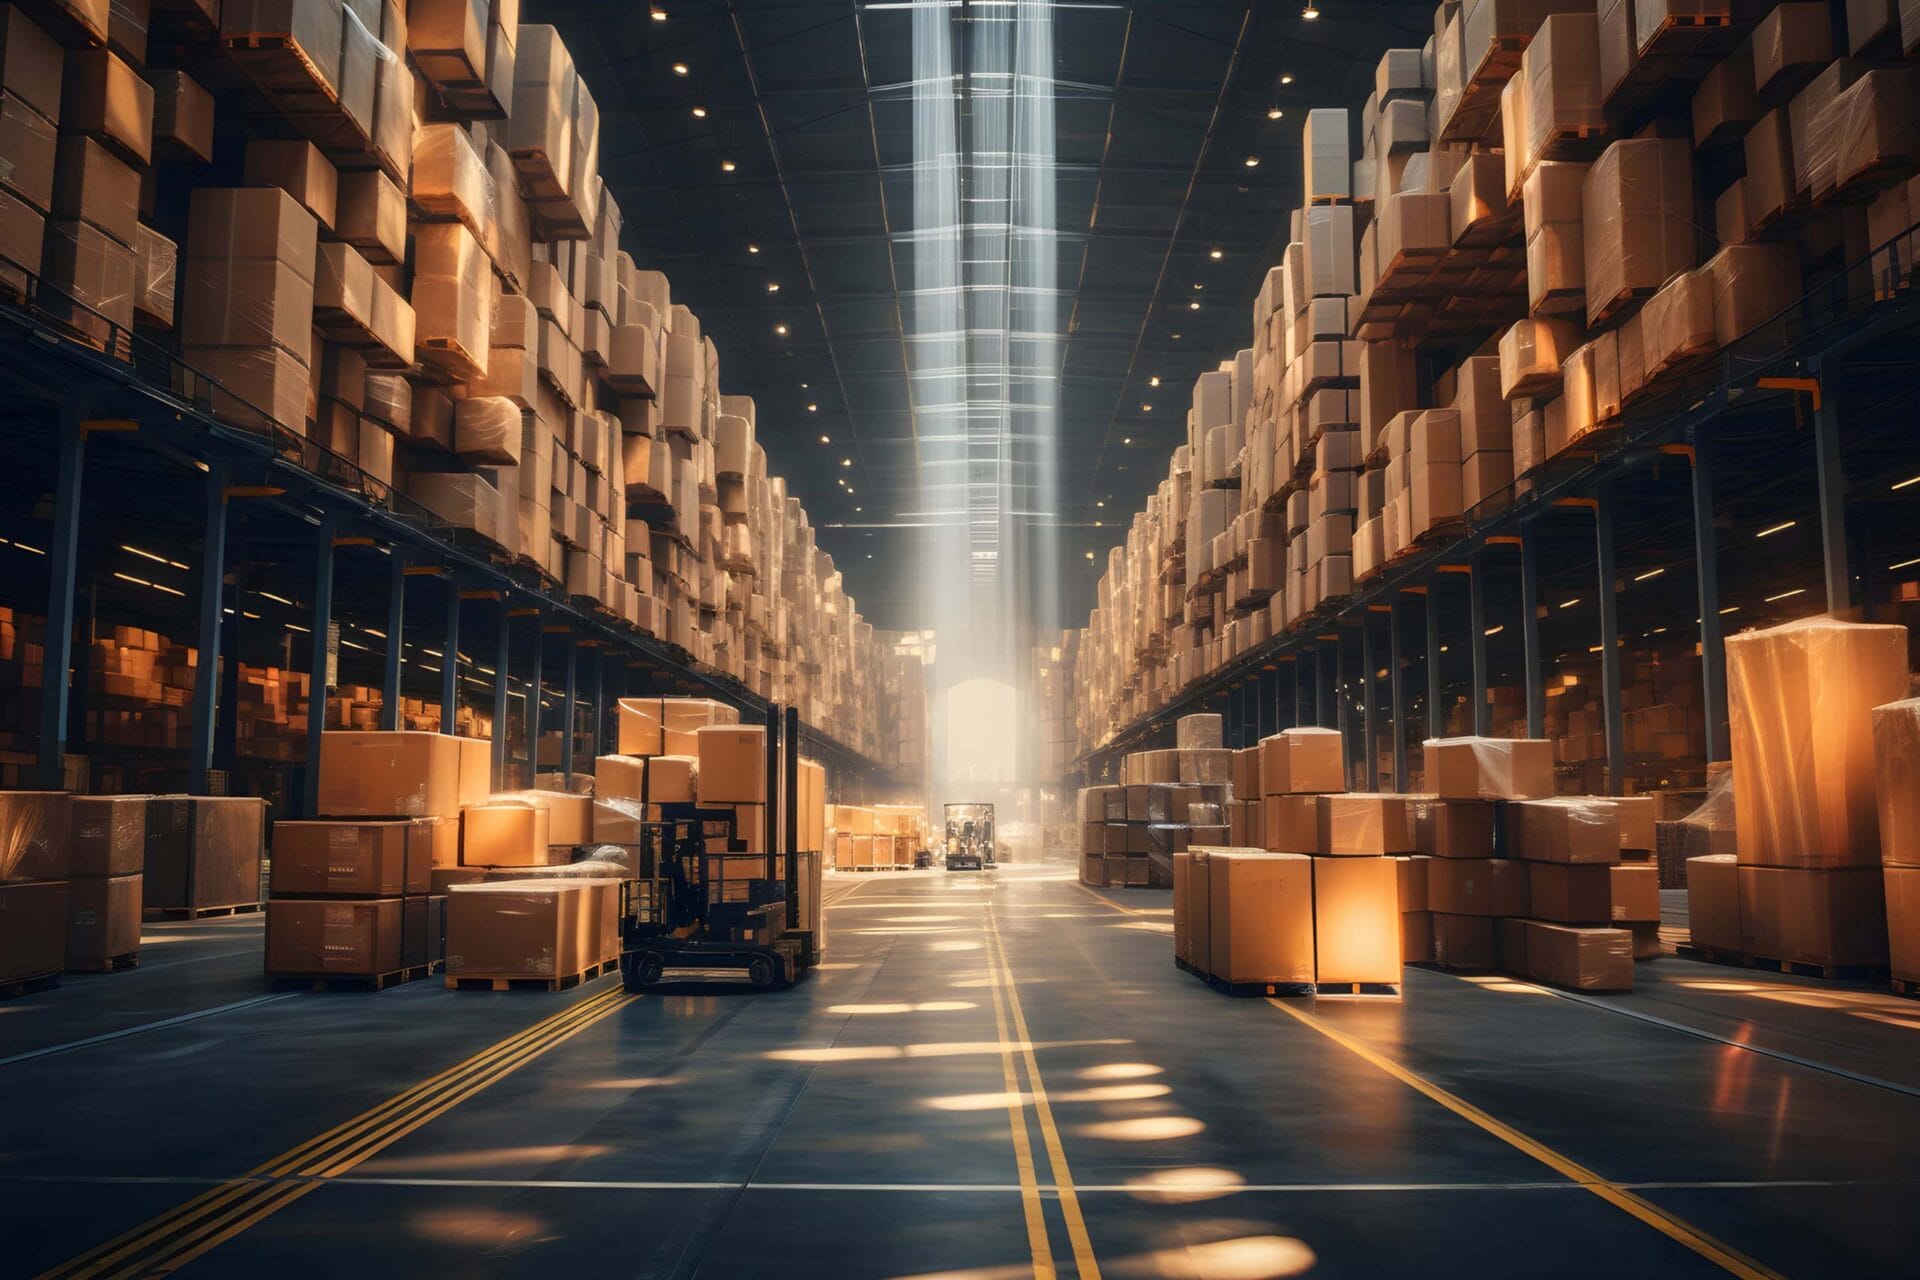 Discover effective inventory management strategies to prevent excess stock, avoid Amazon's long-term storage fees, & optimize profitability.